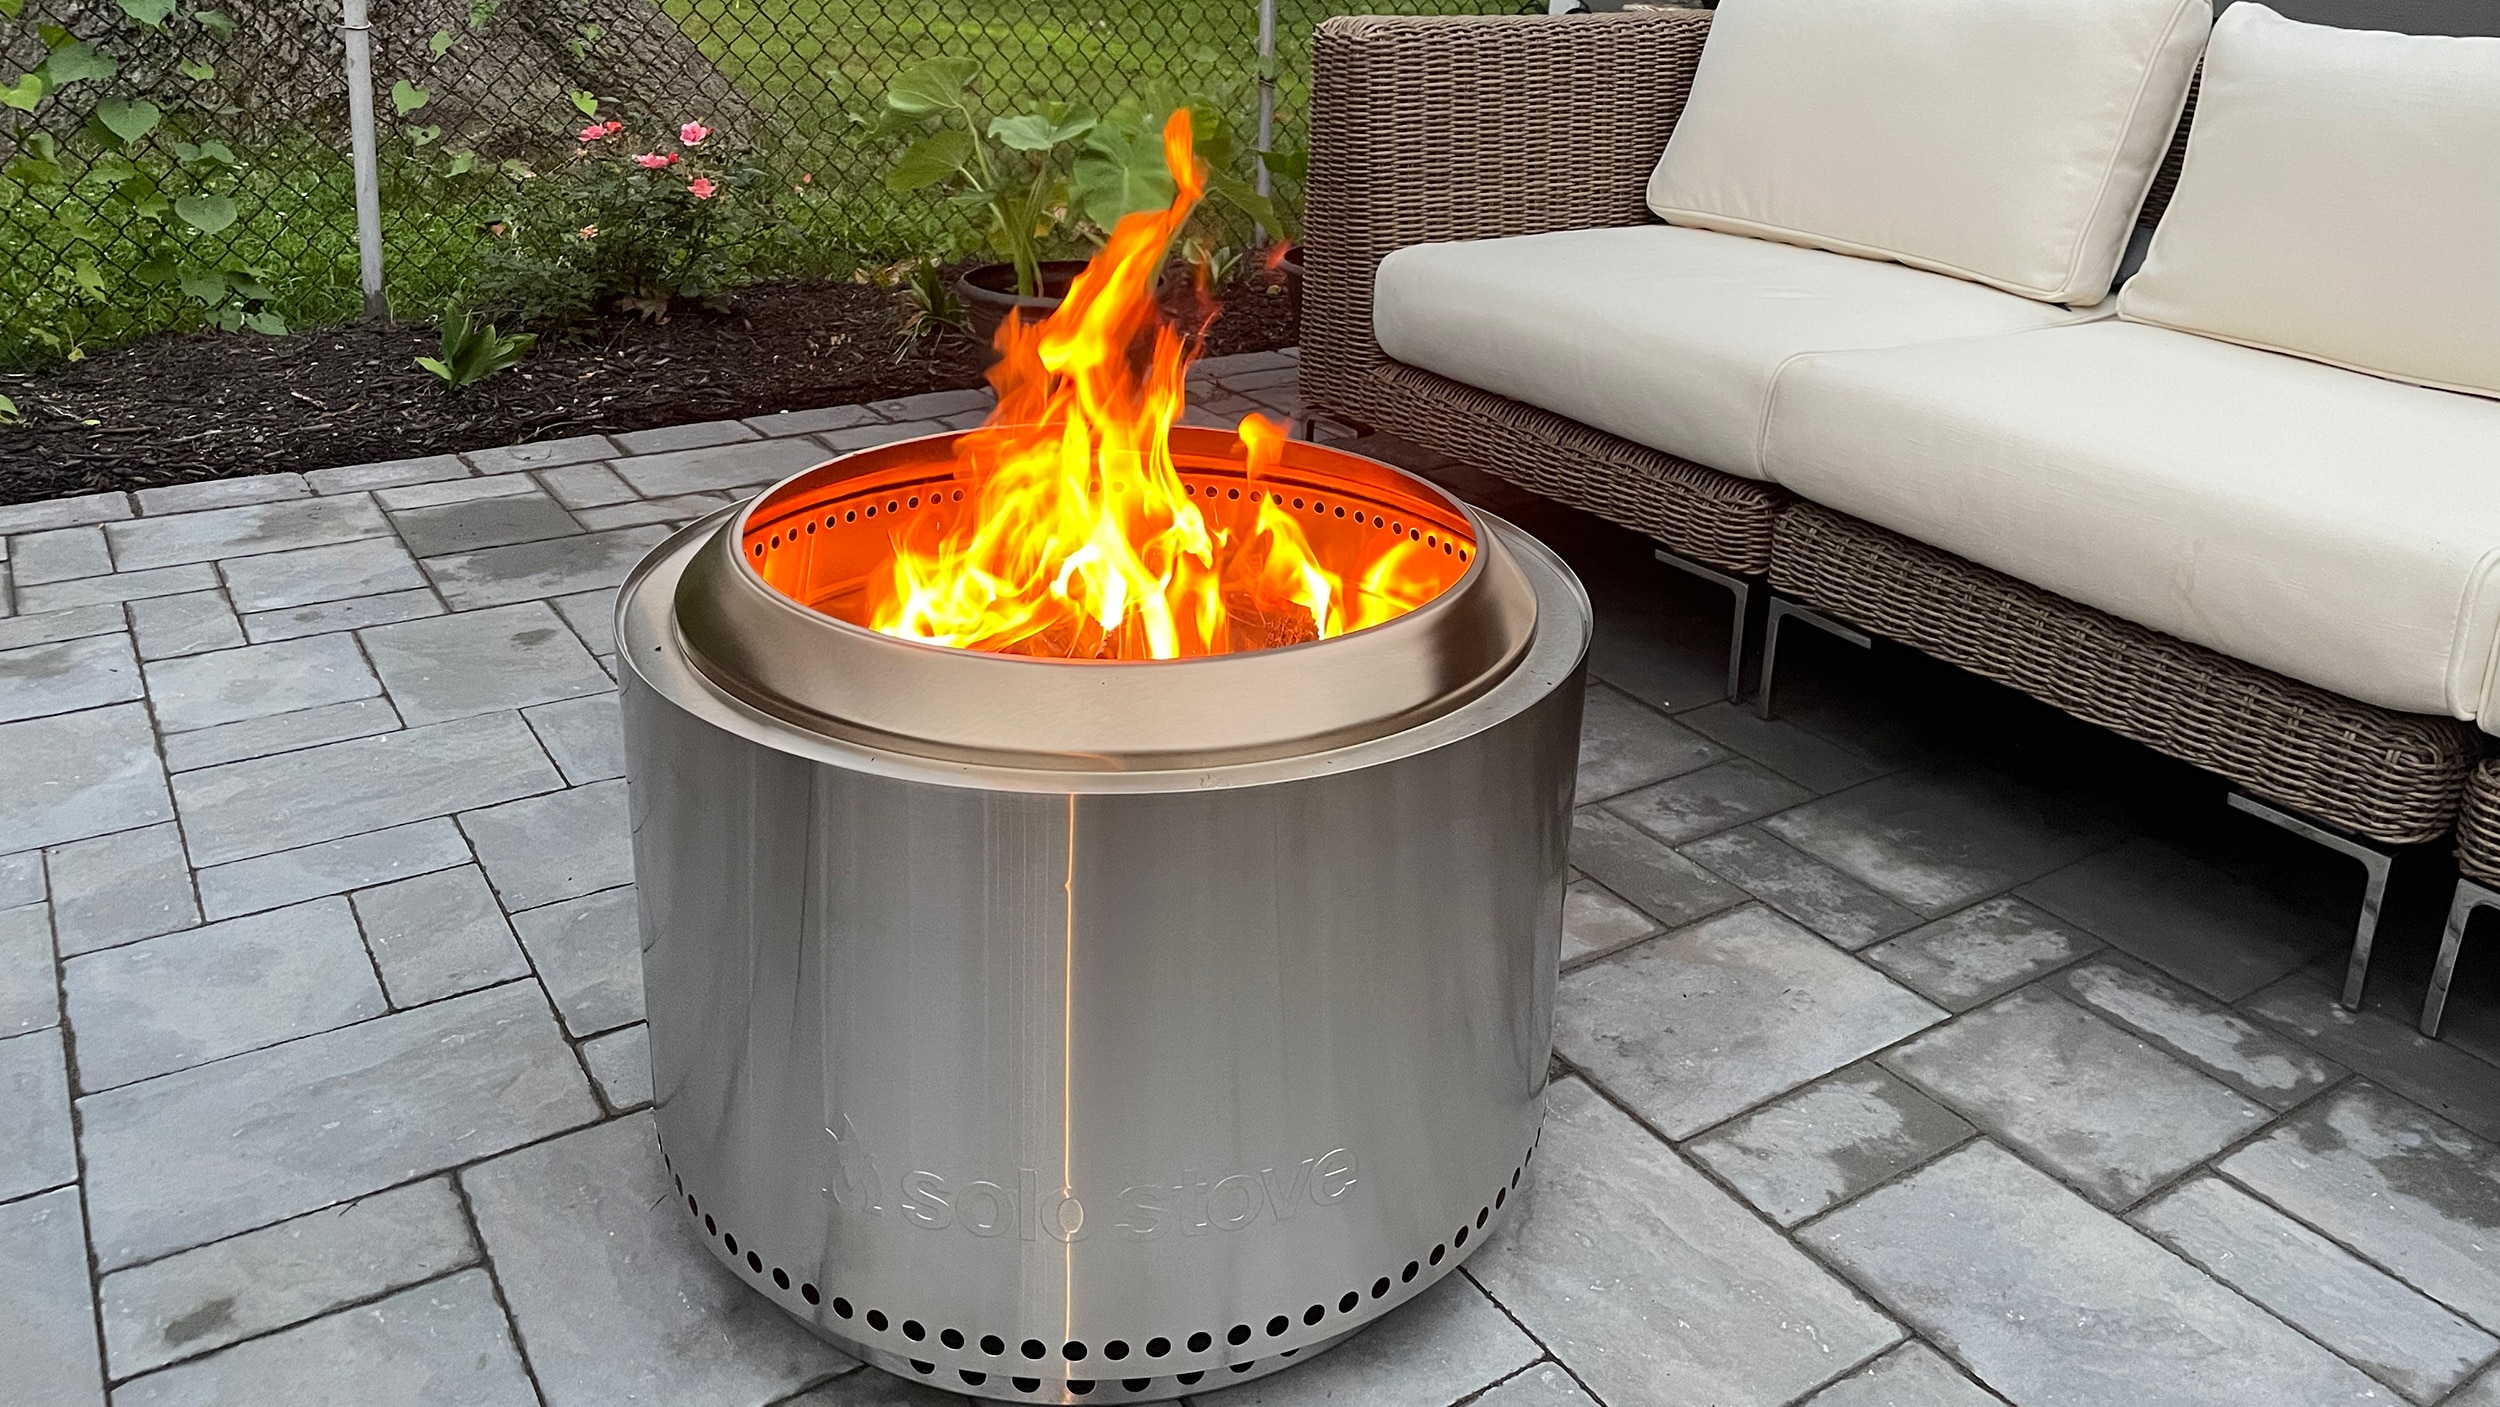 How Do Smokeless Fire Pits Work? - Bassemiers